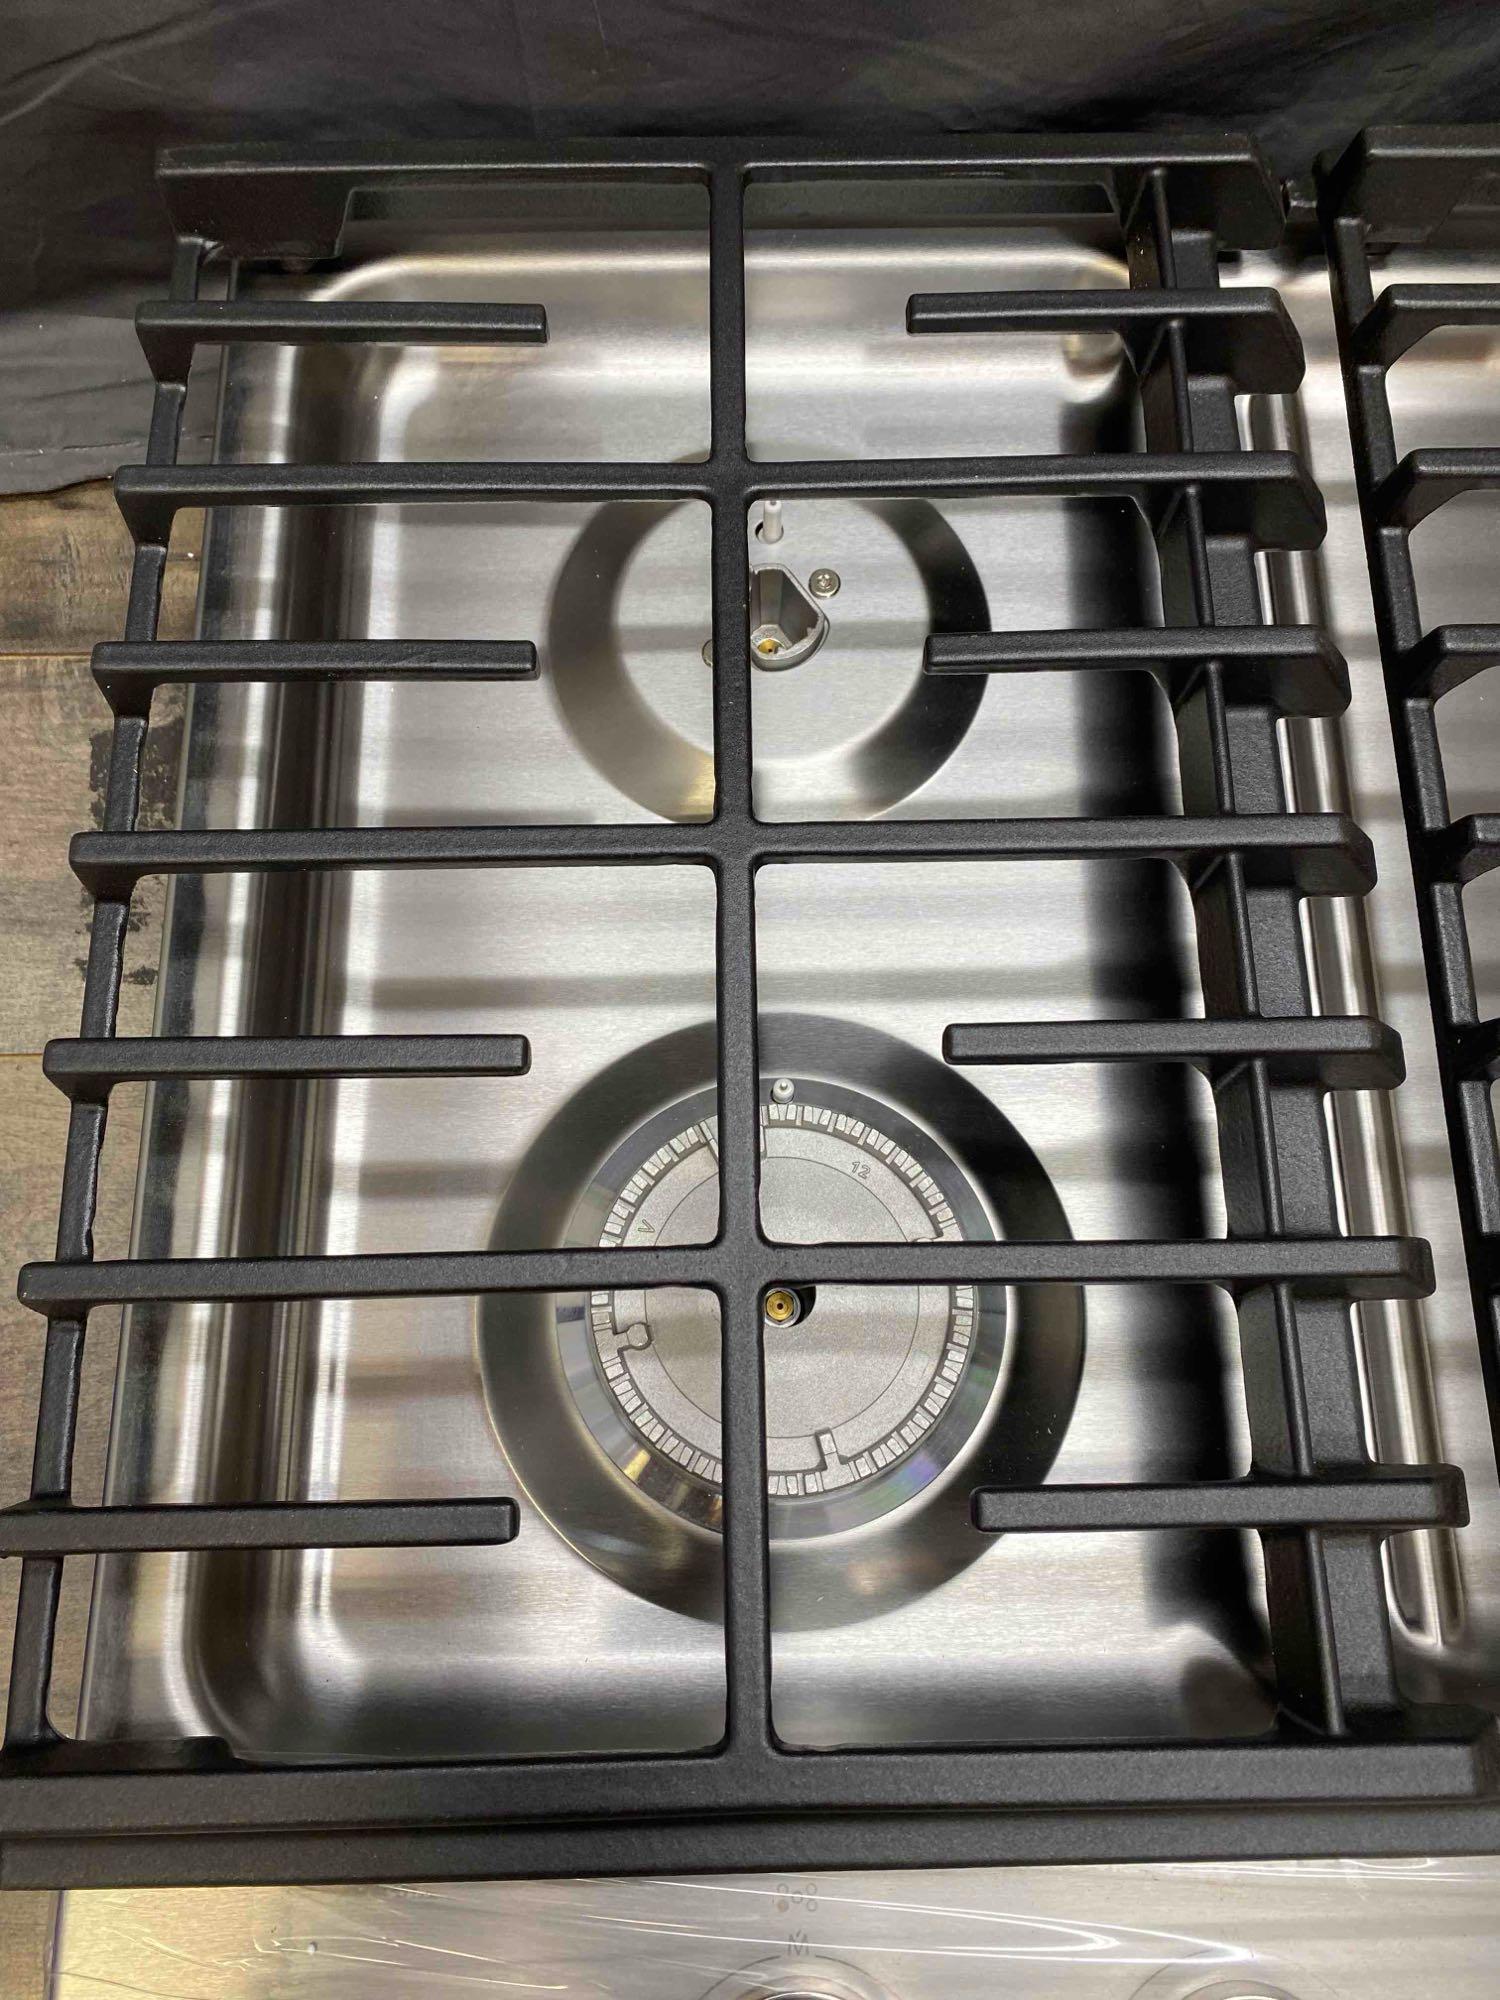 KitchenAid - 36" Built-In Gas Cooktop - Stainless Steel